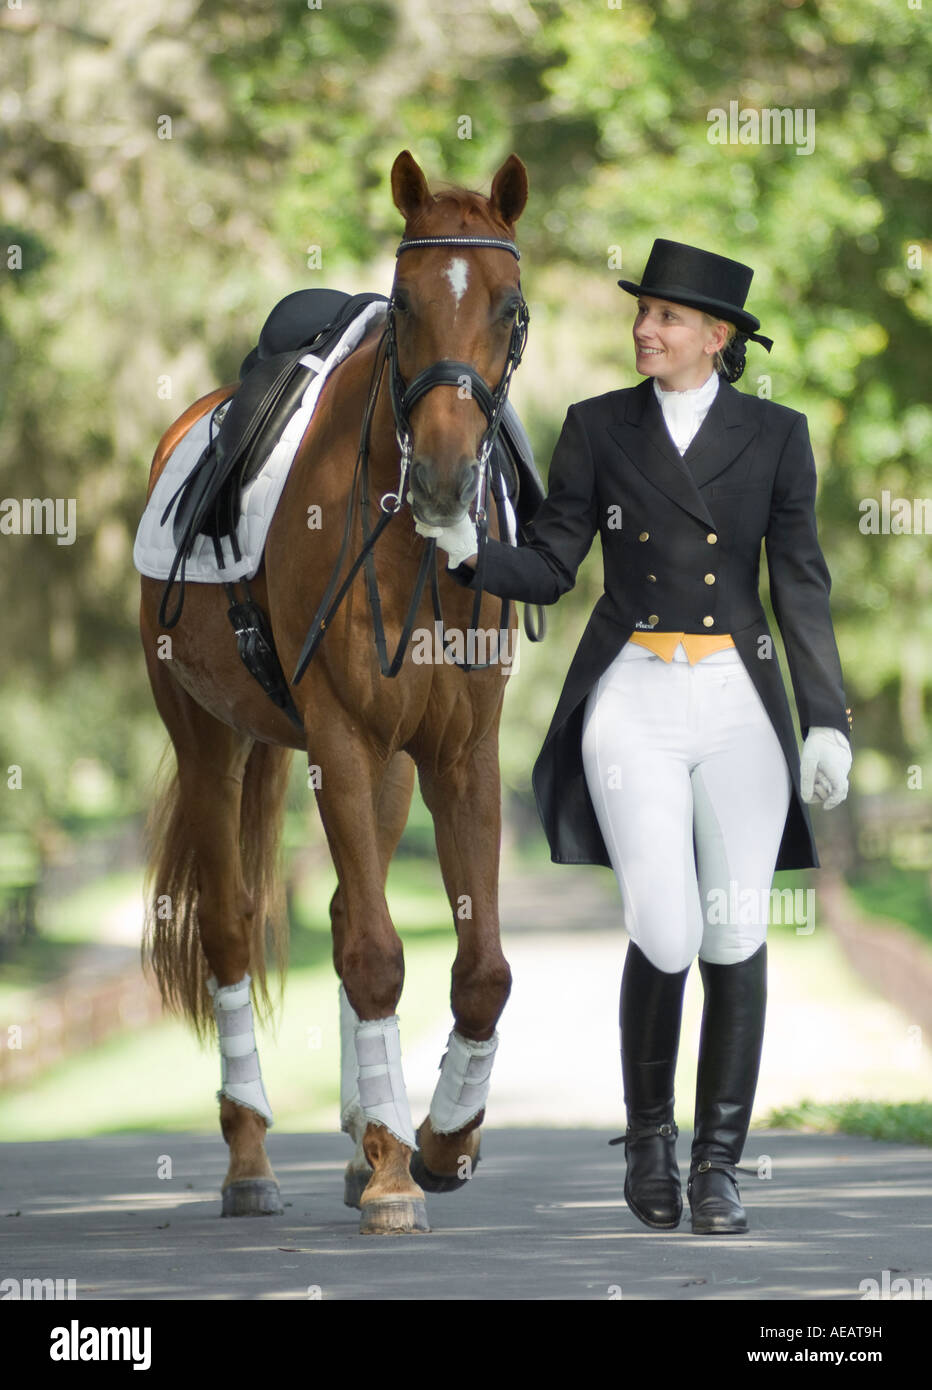 Woman in dressage costume with Warmblood horse Stock Photo - Alamy